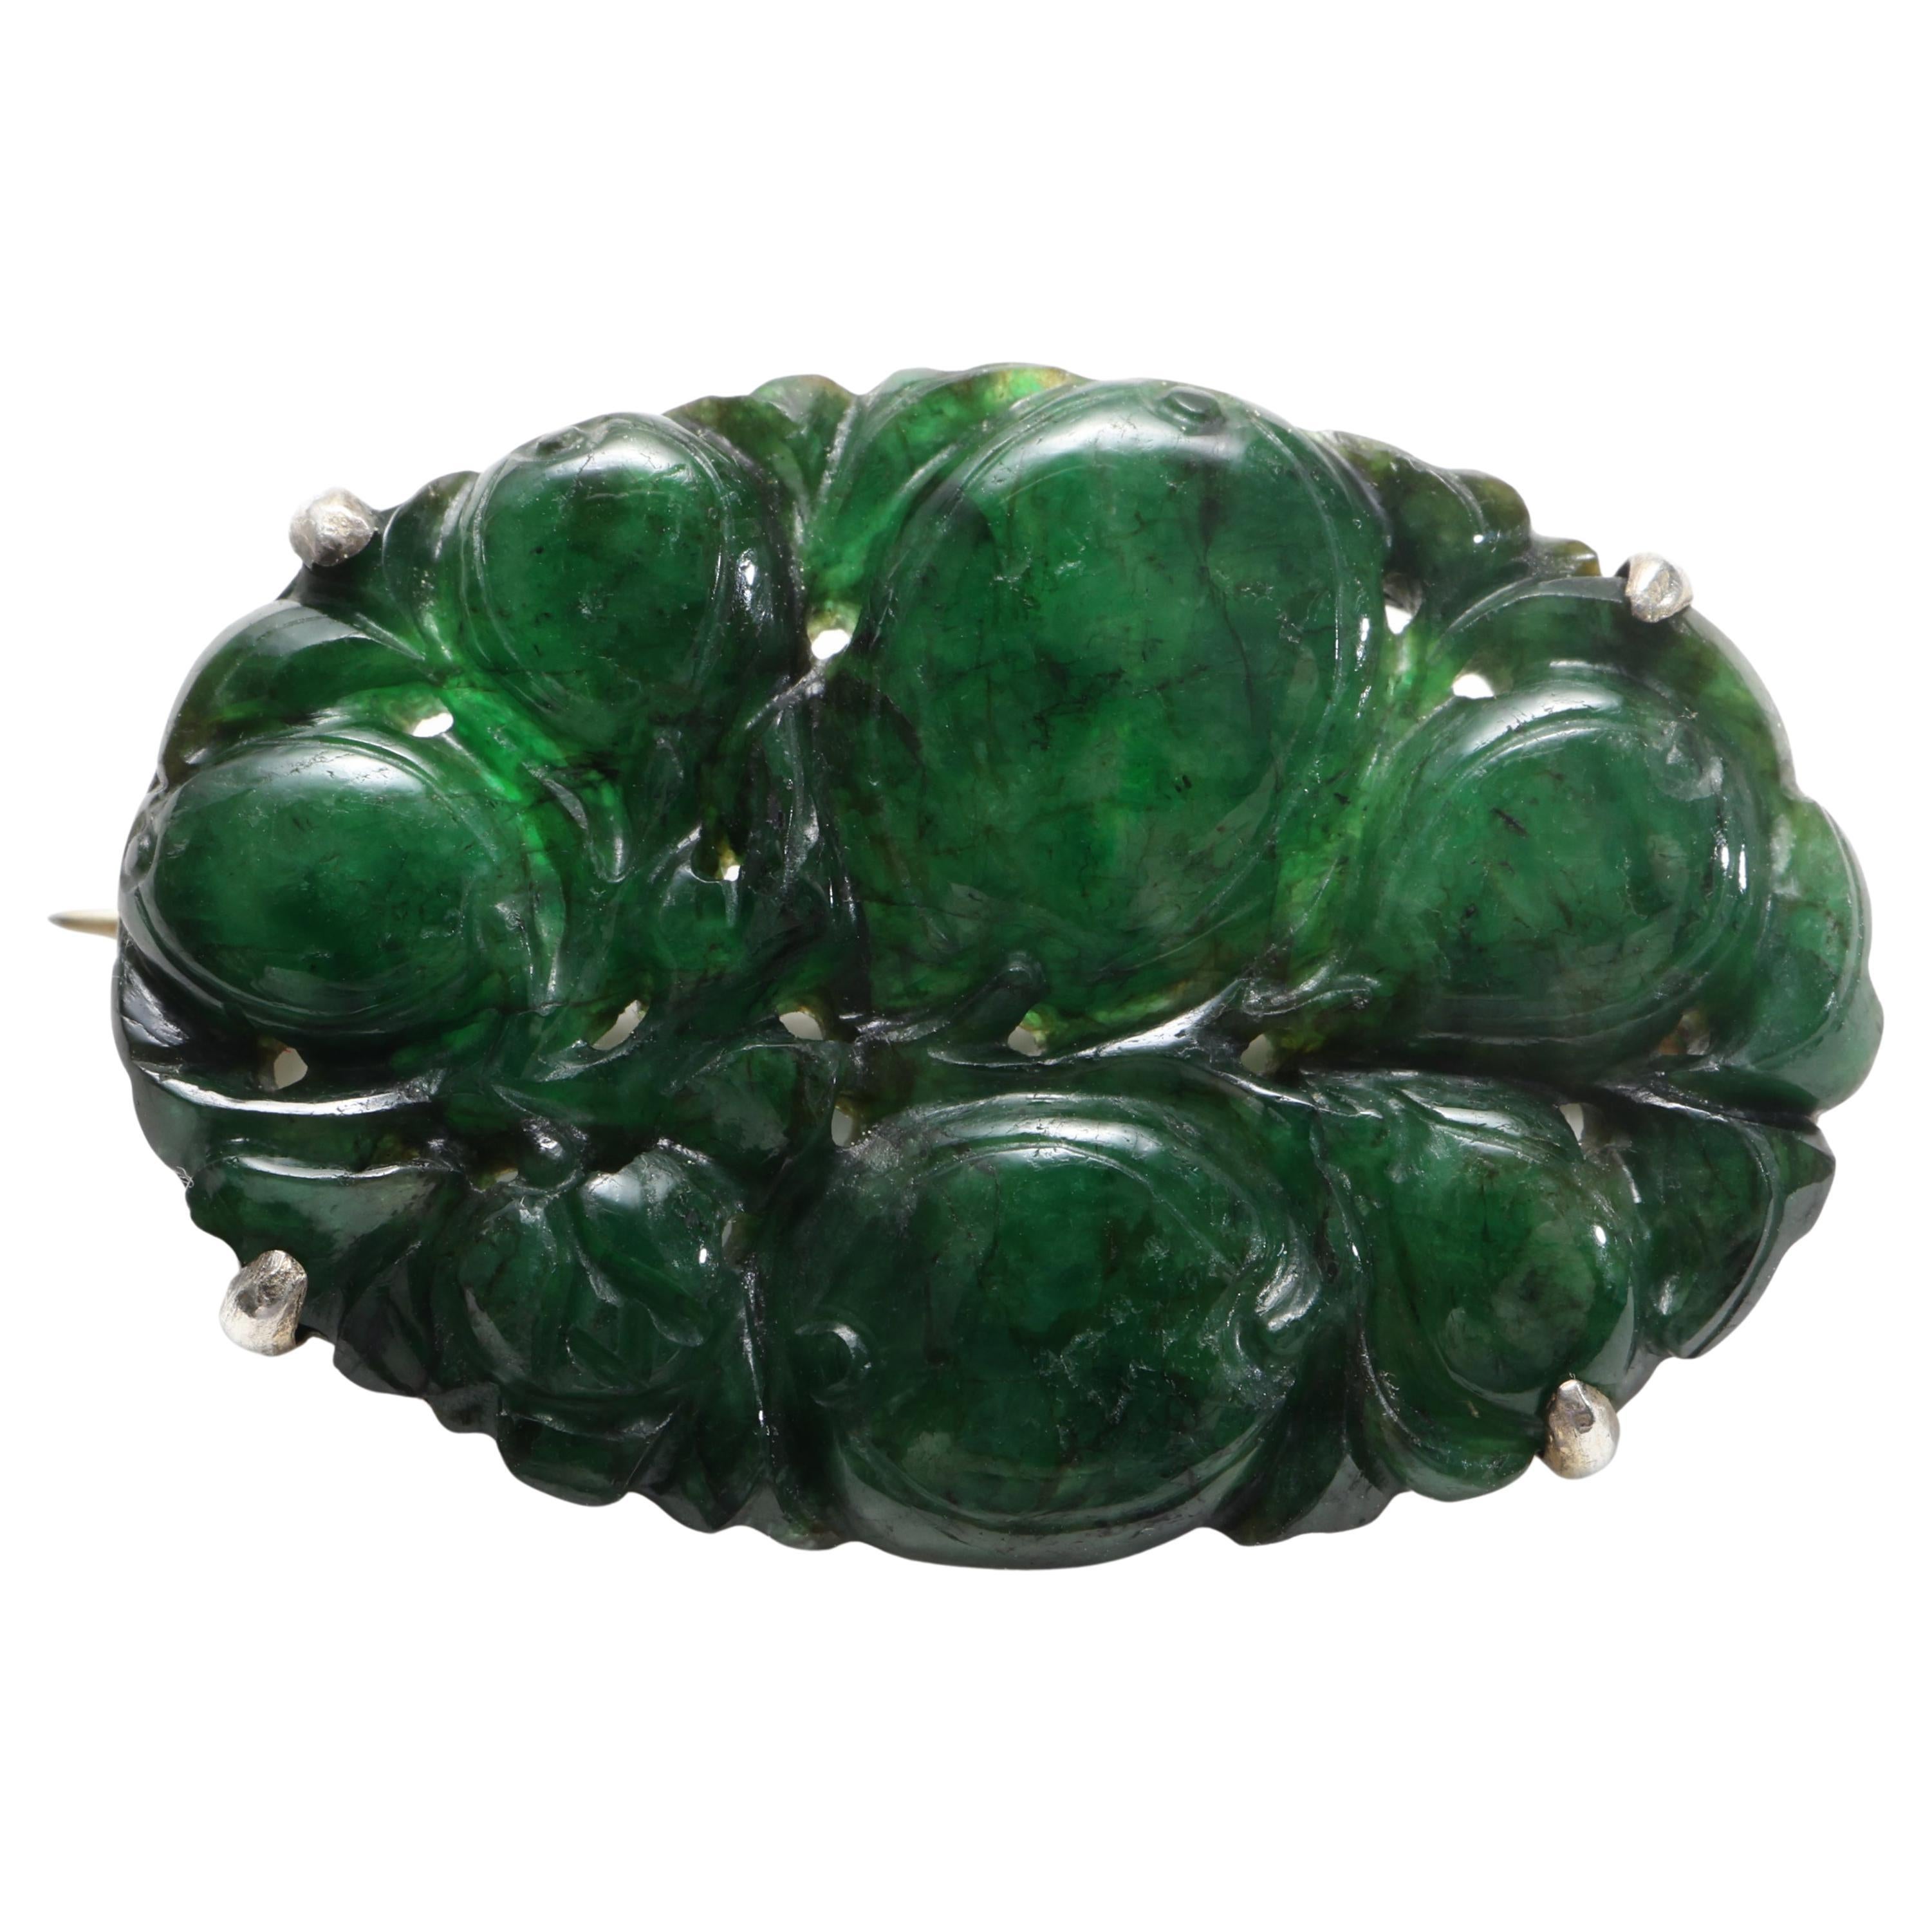 Which color of jade is most valuable?